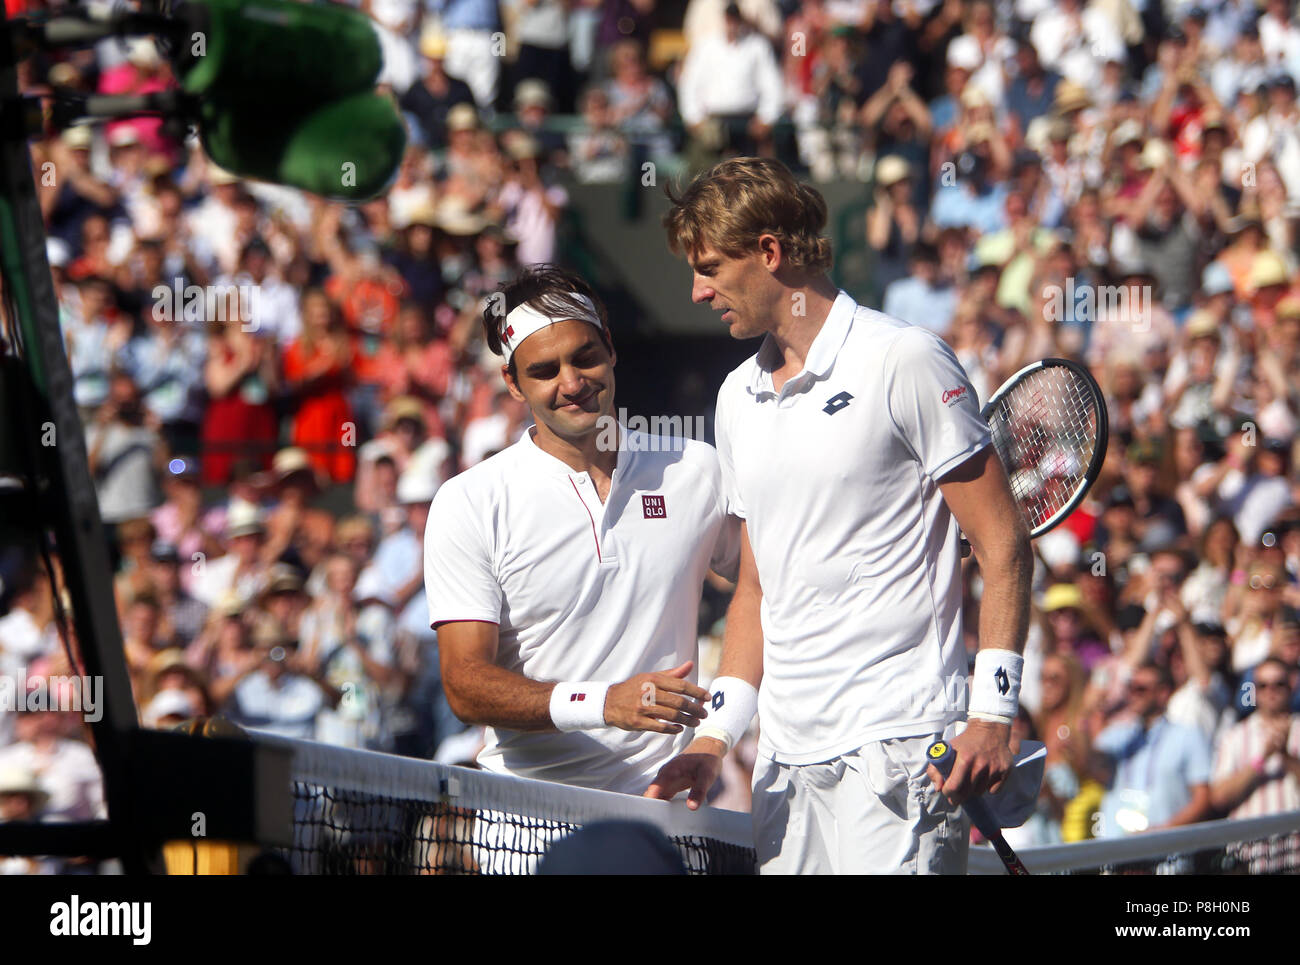 London, UK. 11th July, 2018. Wimbledon Tennis:Roger Federer is consoled by  opponent Kevin Anderson of South Africa after Anderson's five set victory  over Federe in the quarter finals at Wimbledon today. Credit: